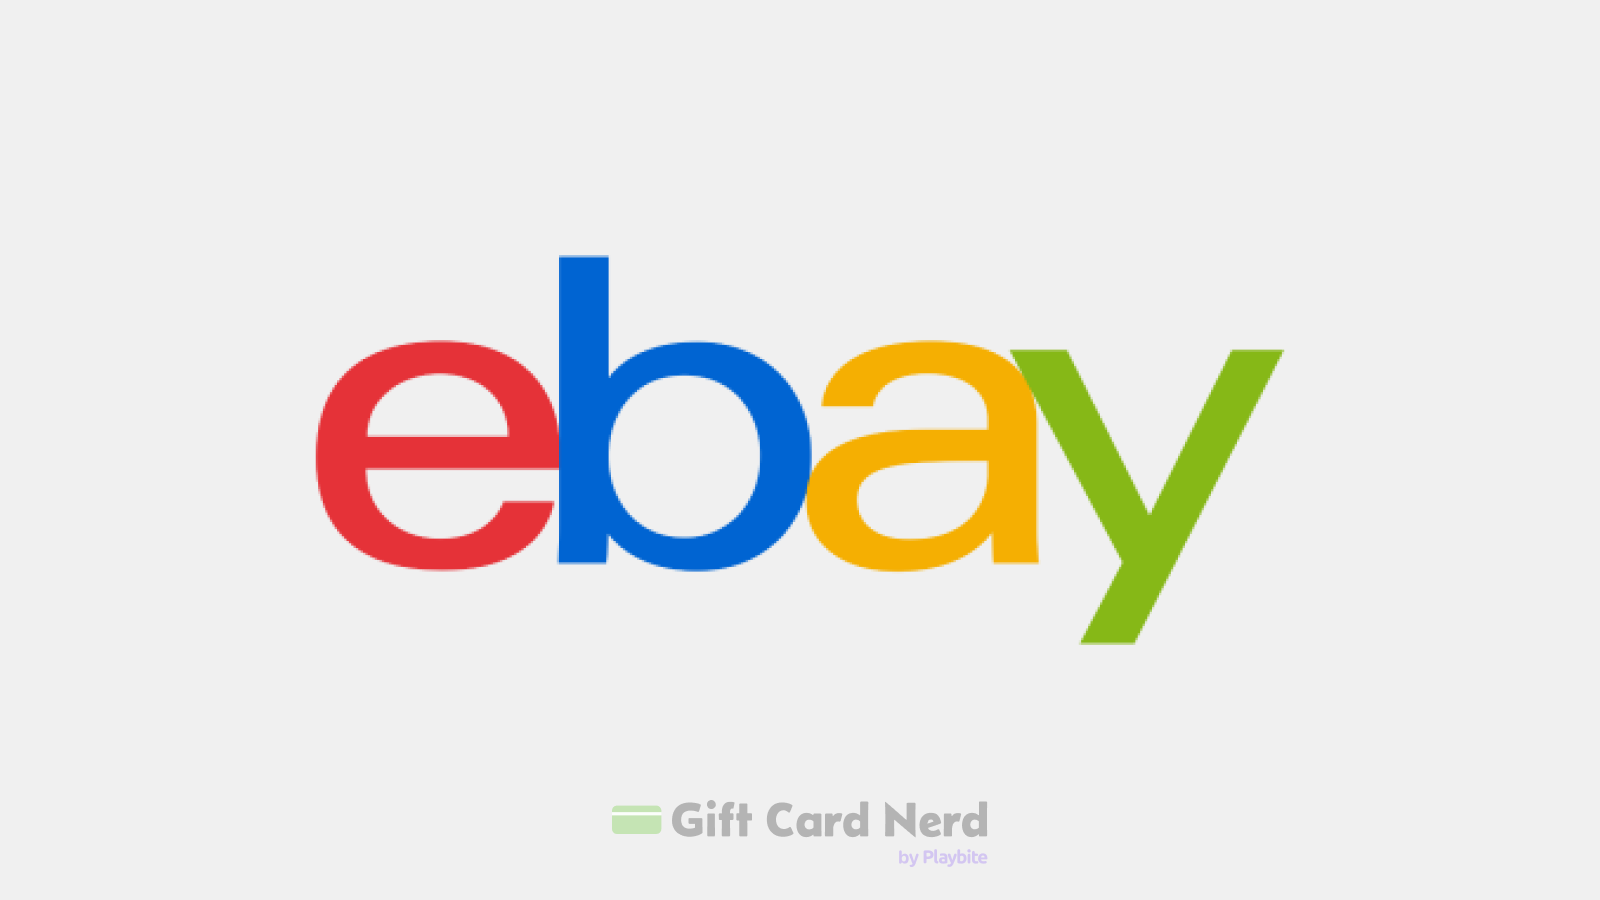 Can You Use an eBay Gift Card on Steam?